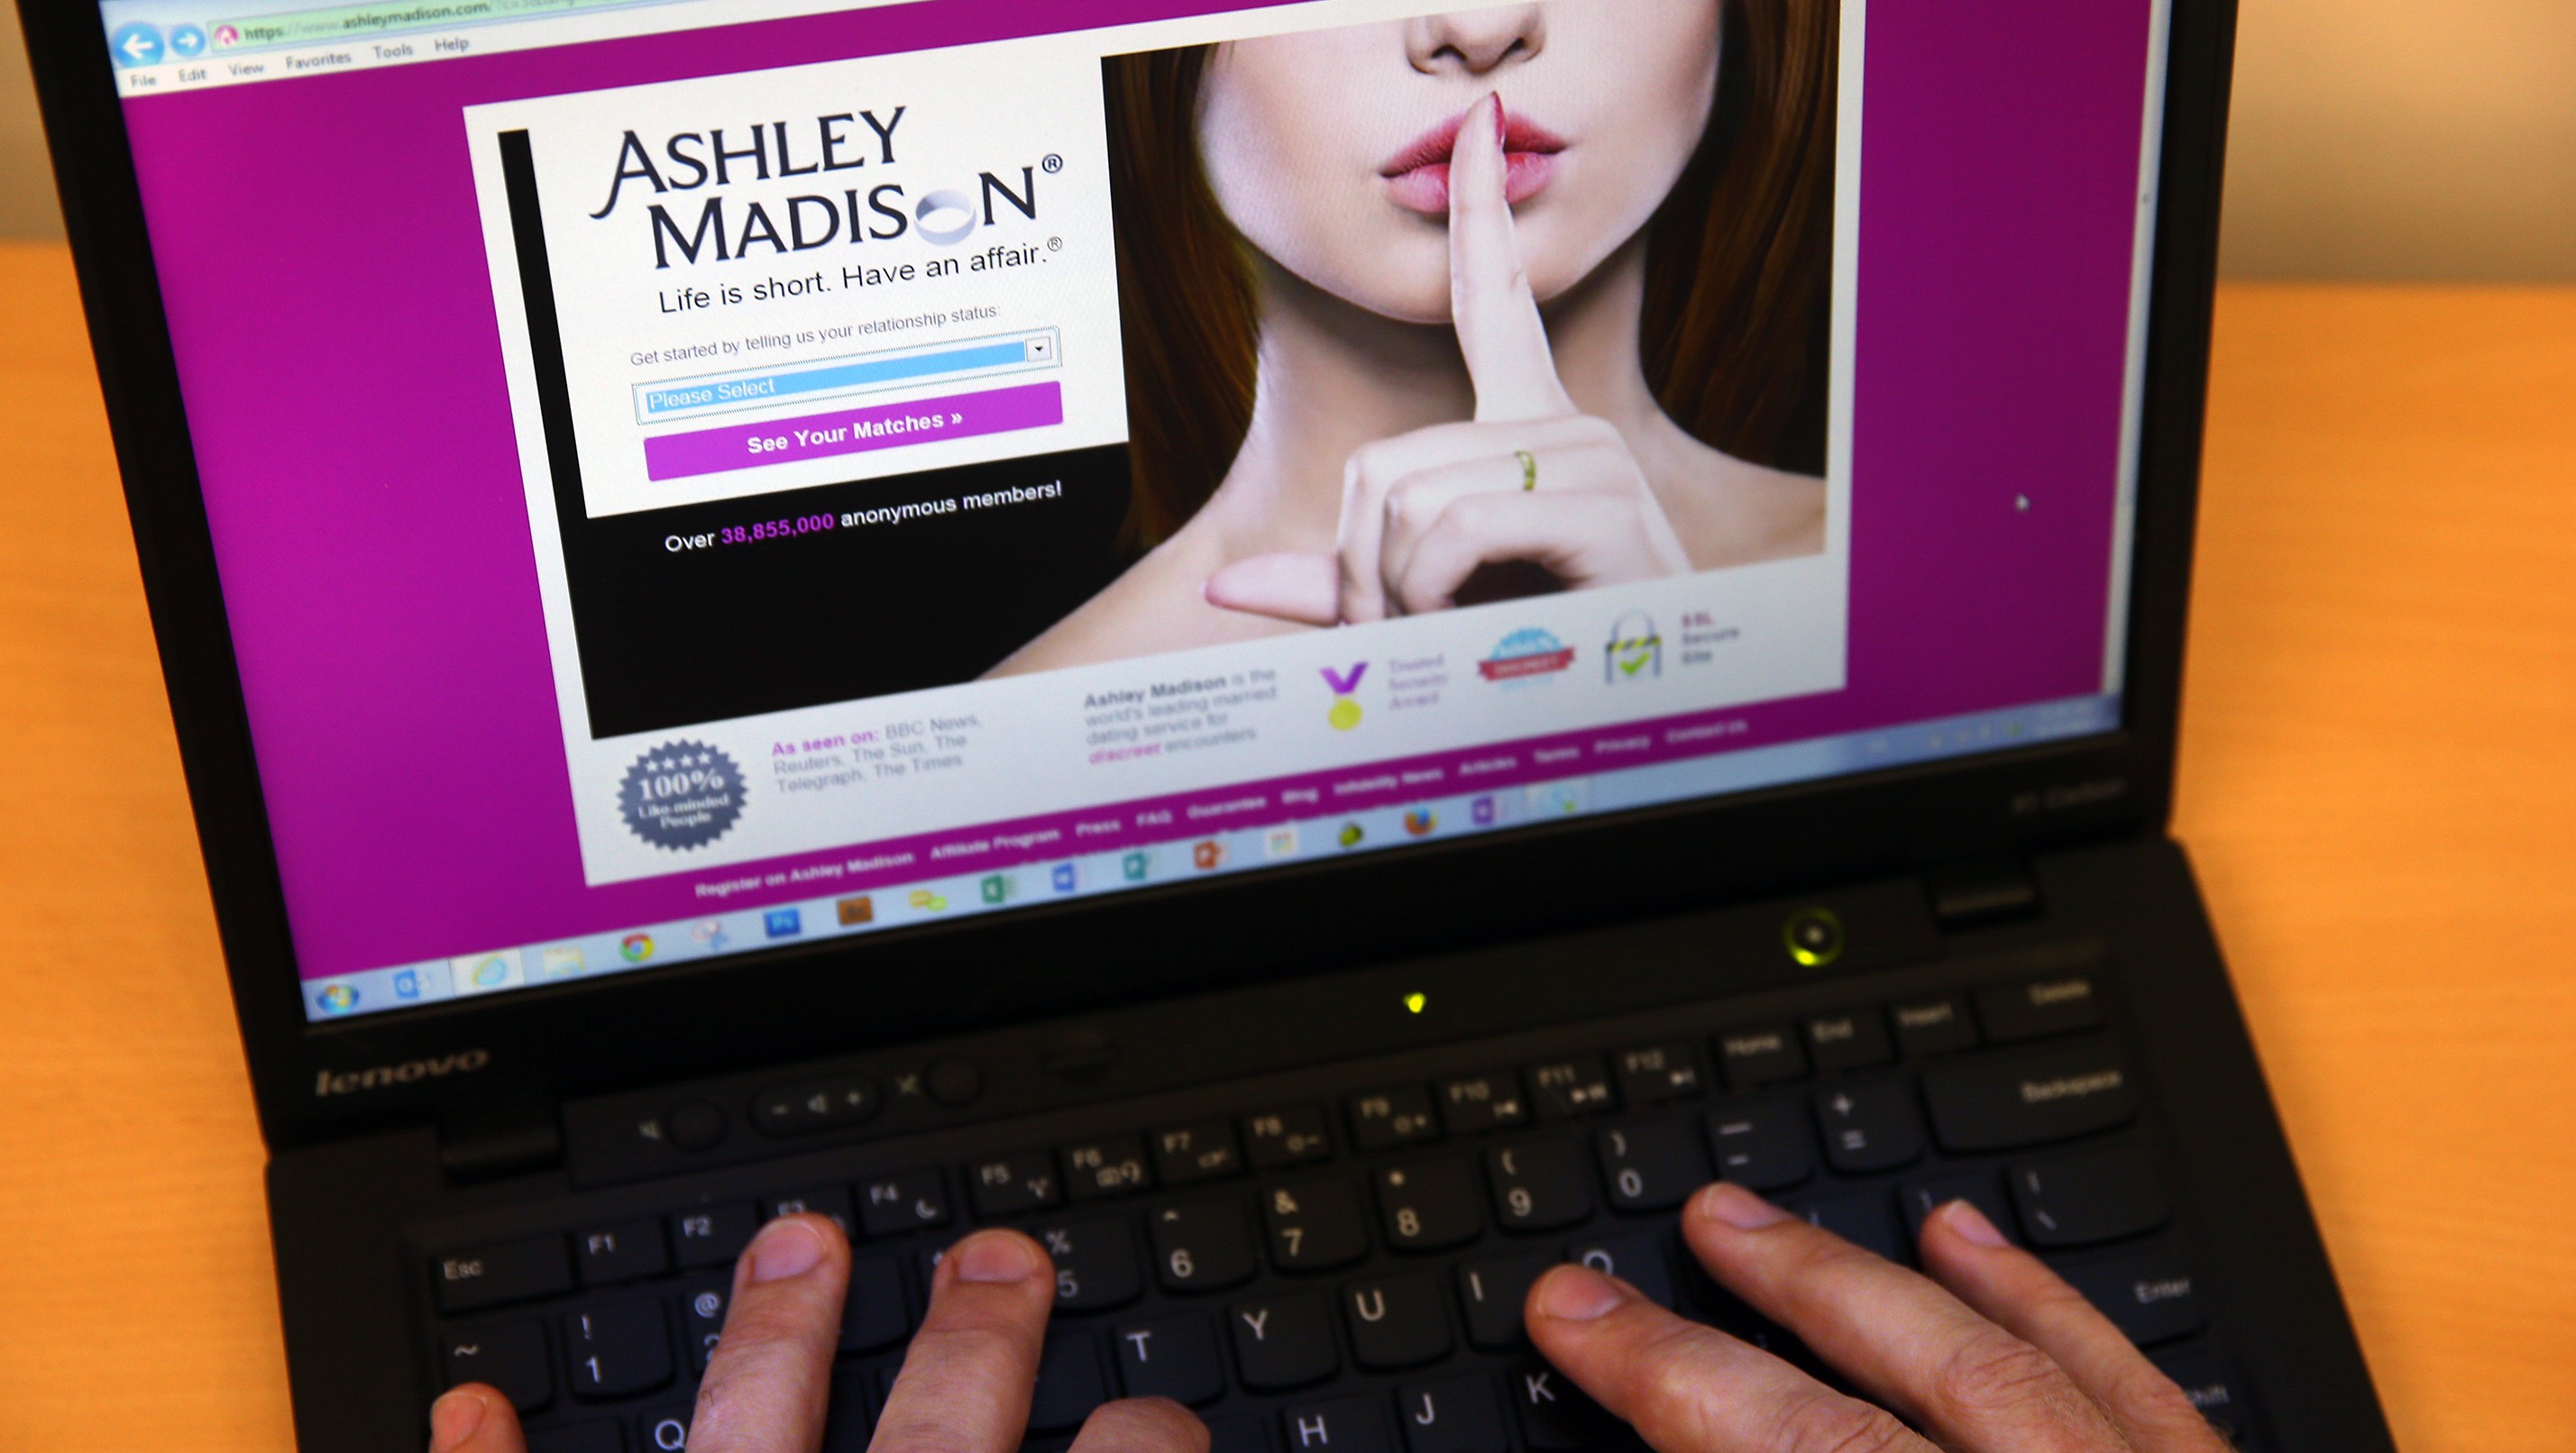 ashley-madison-email-searches-are-being-recorded-5-facts-heavy